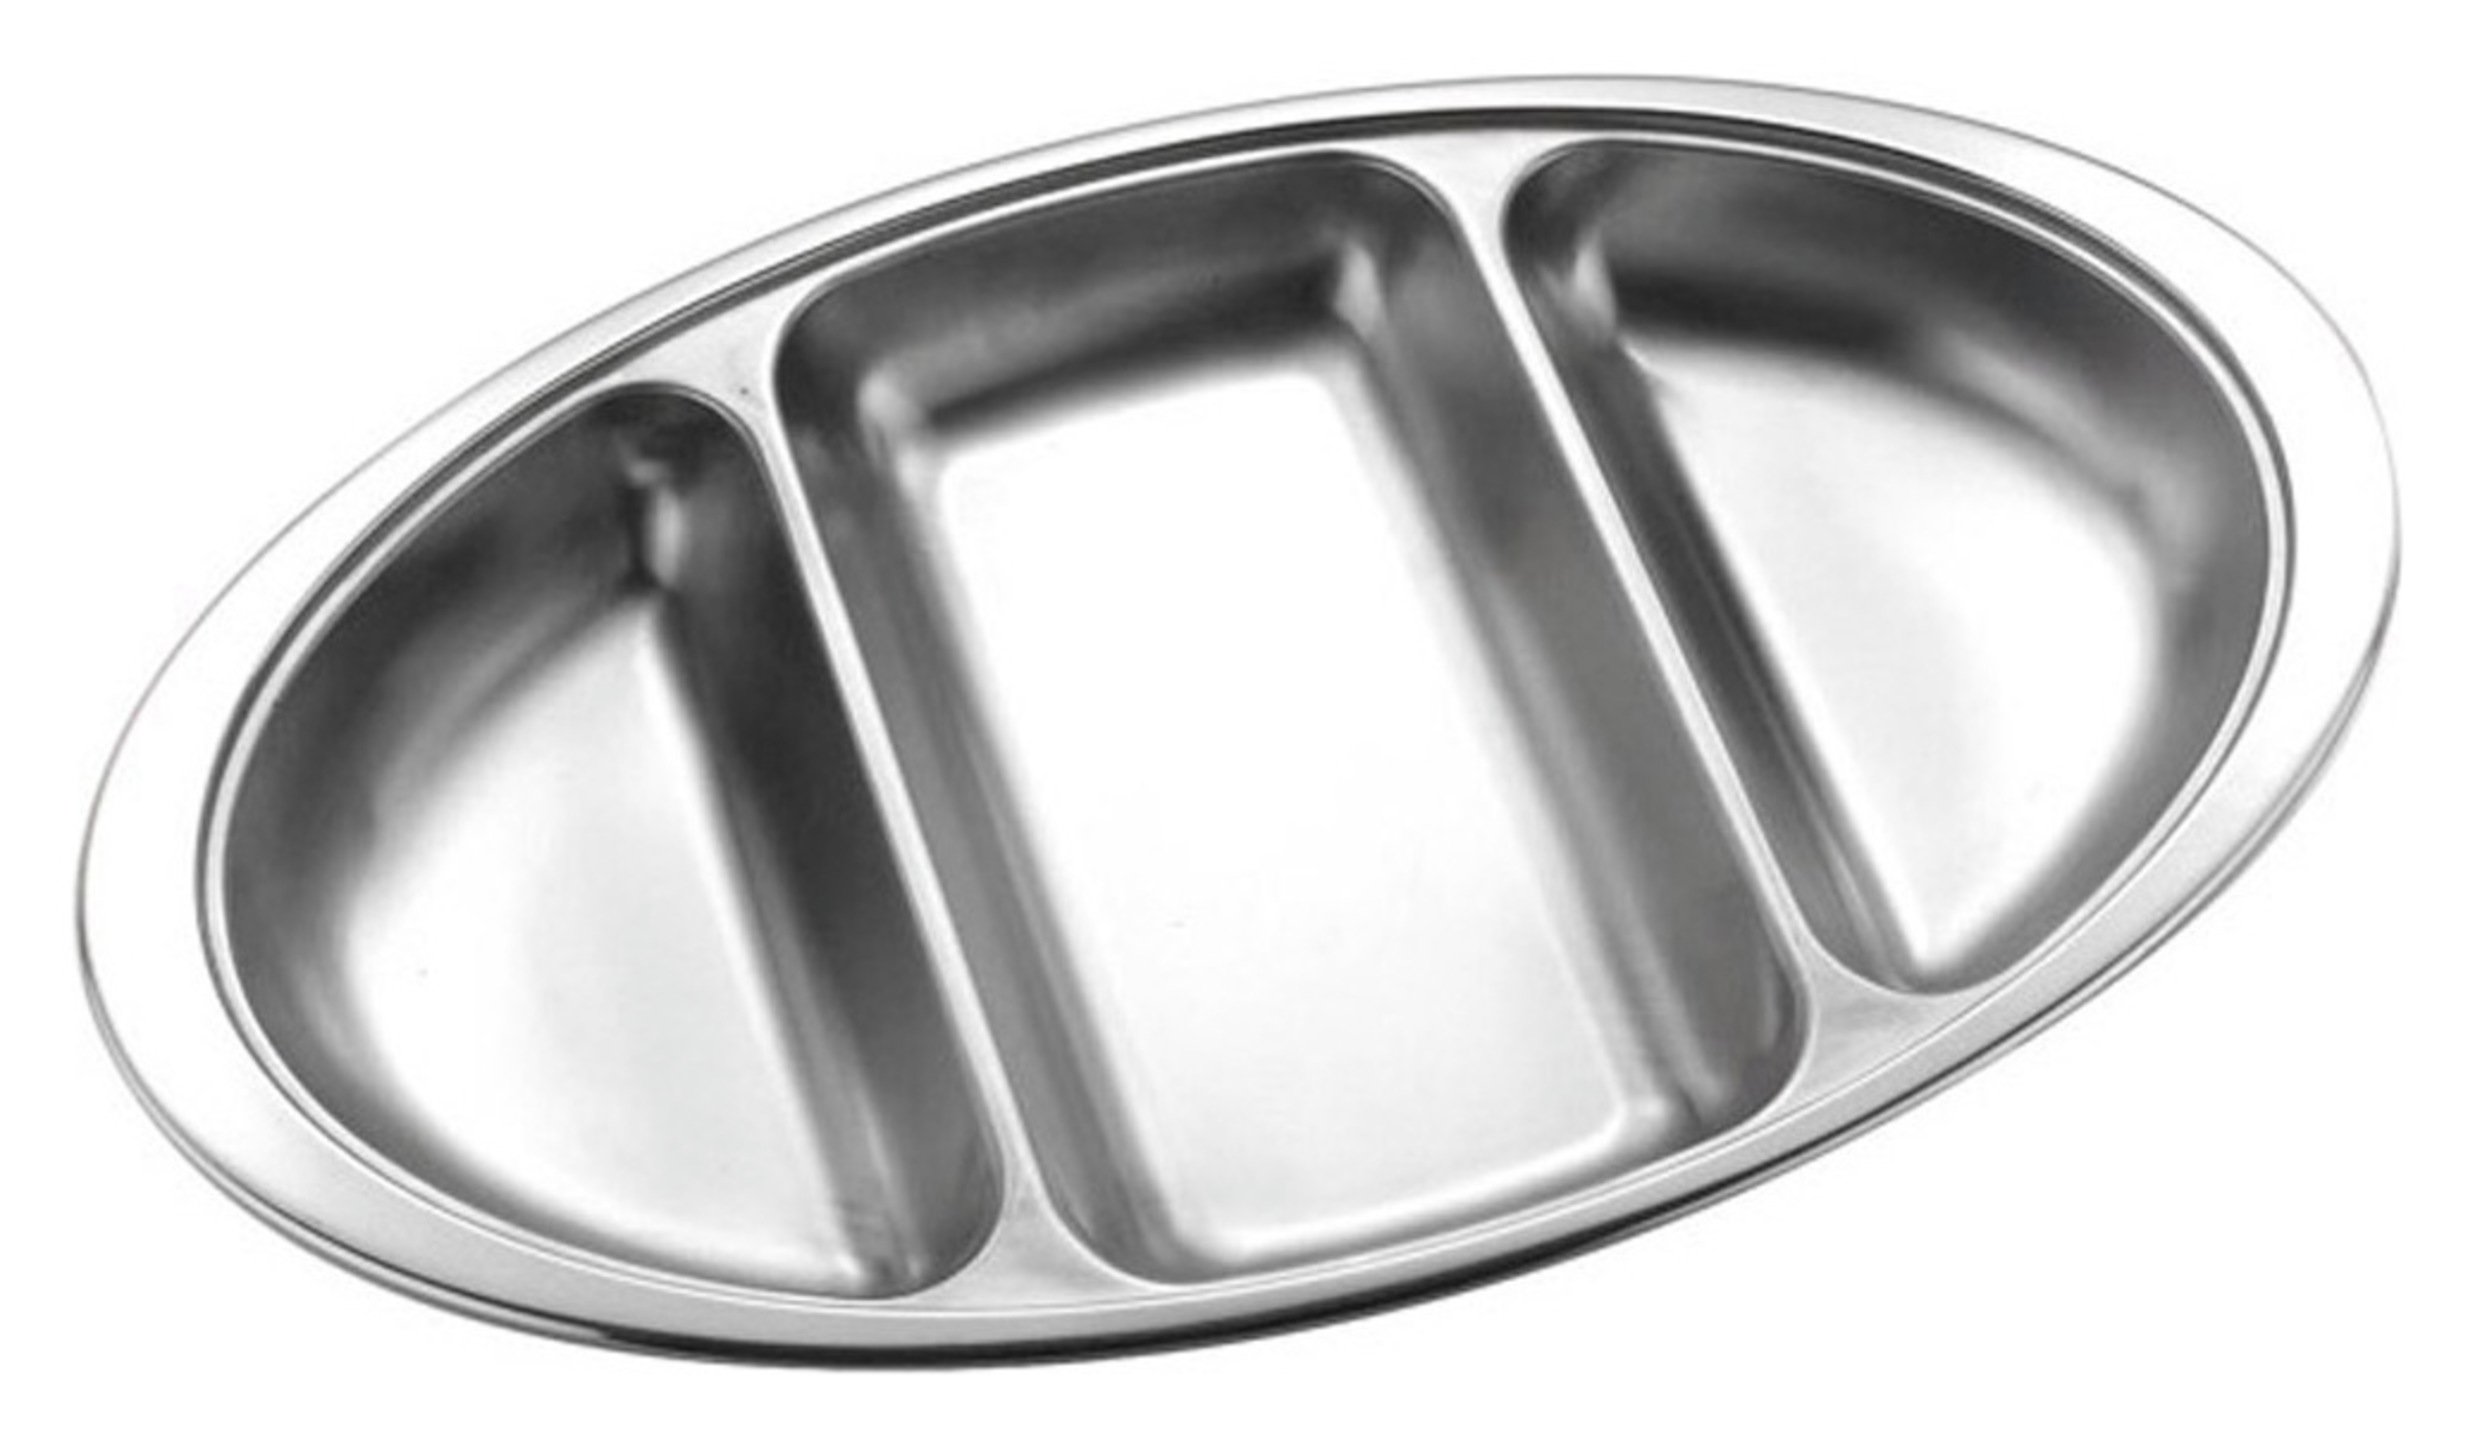 Zodiac Stainless Steel 3 Section Vegetable Dish